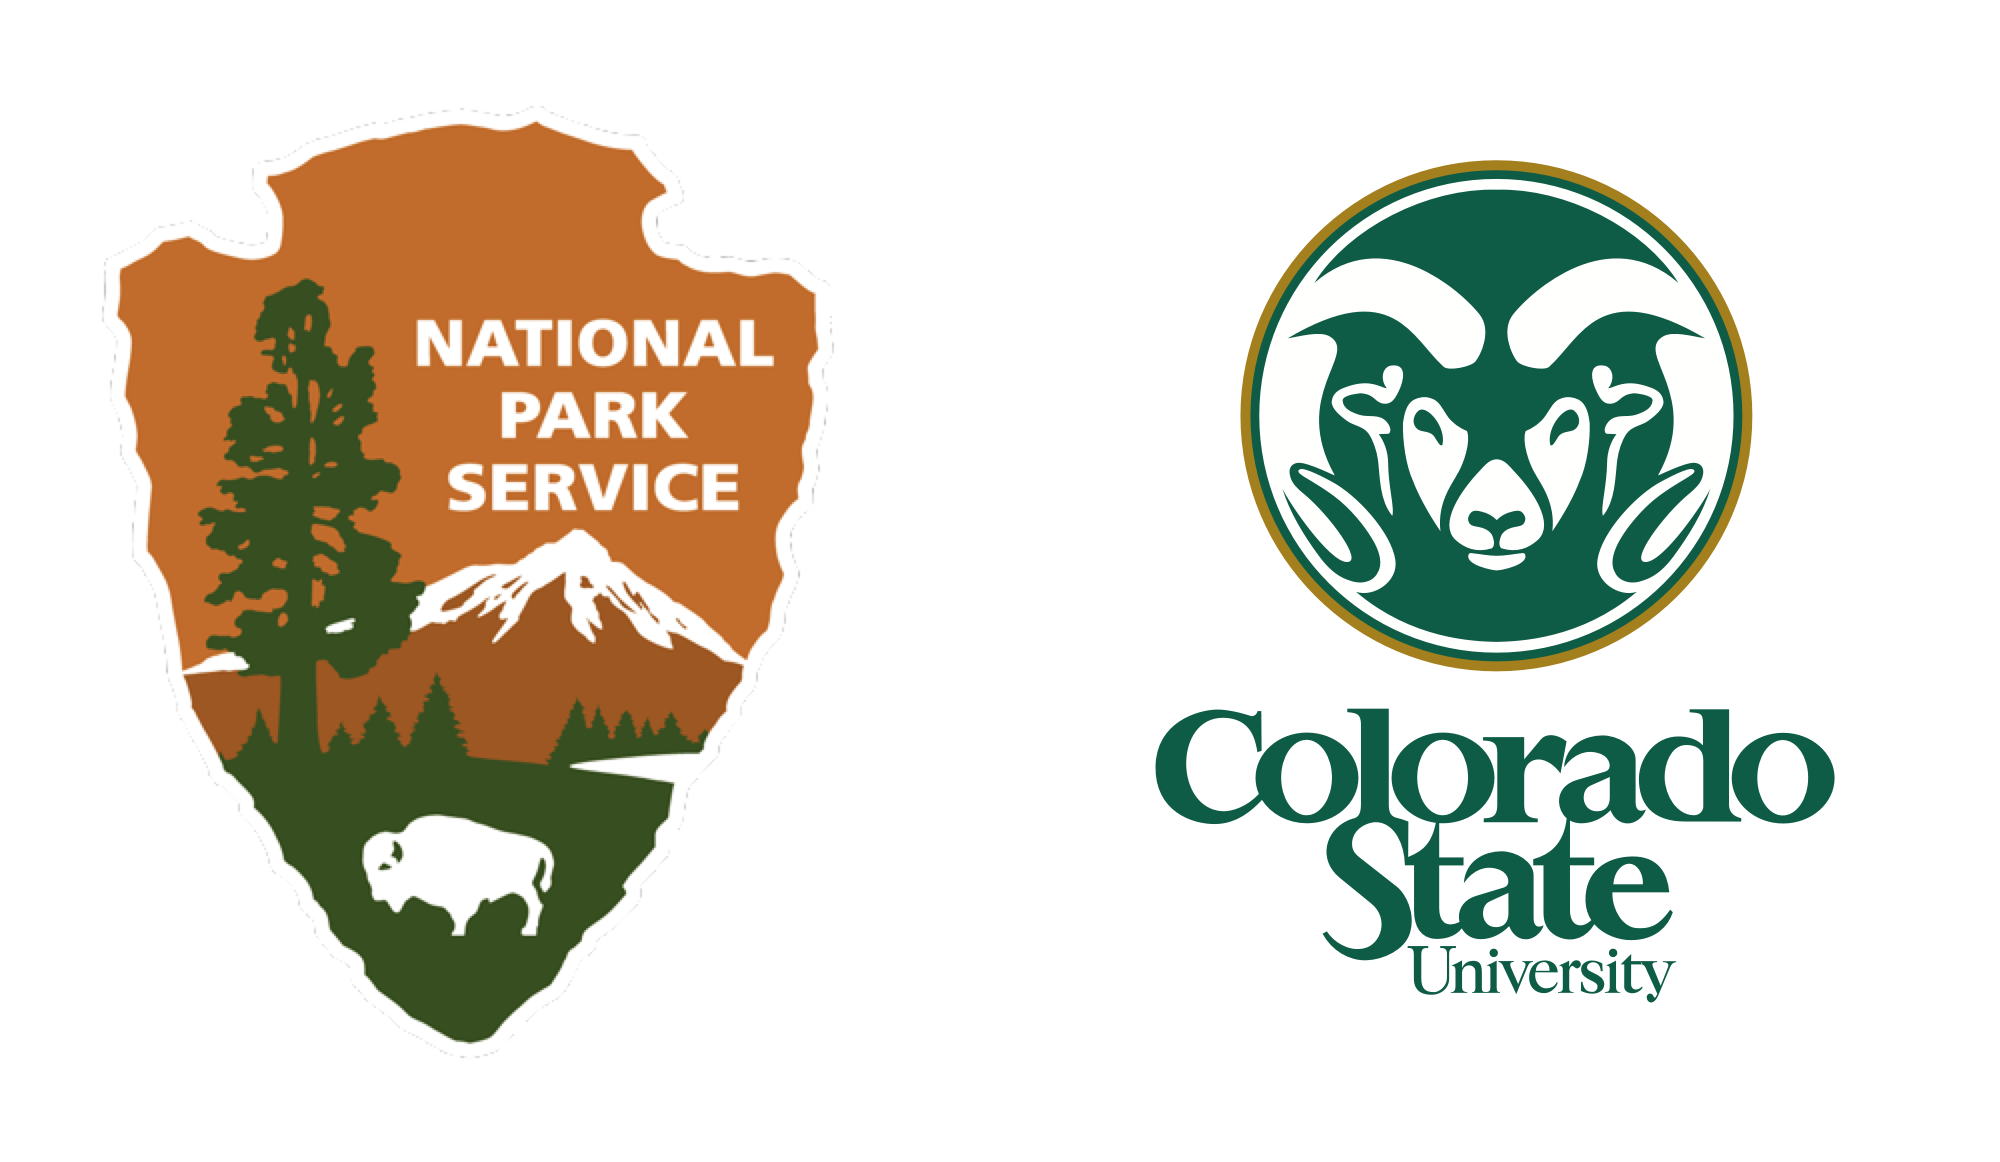 logos for the National Park Service and Colorado State University